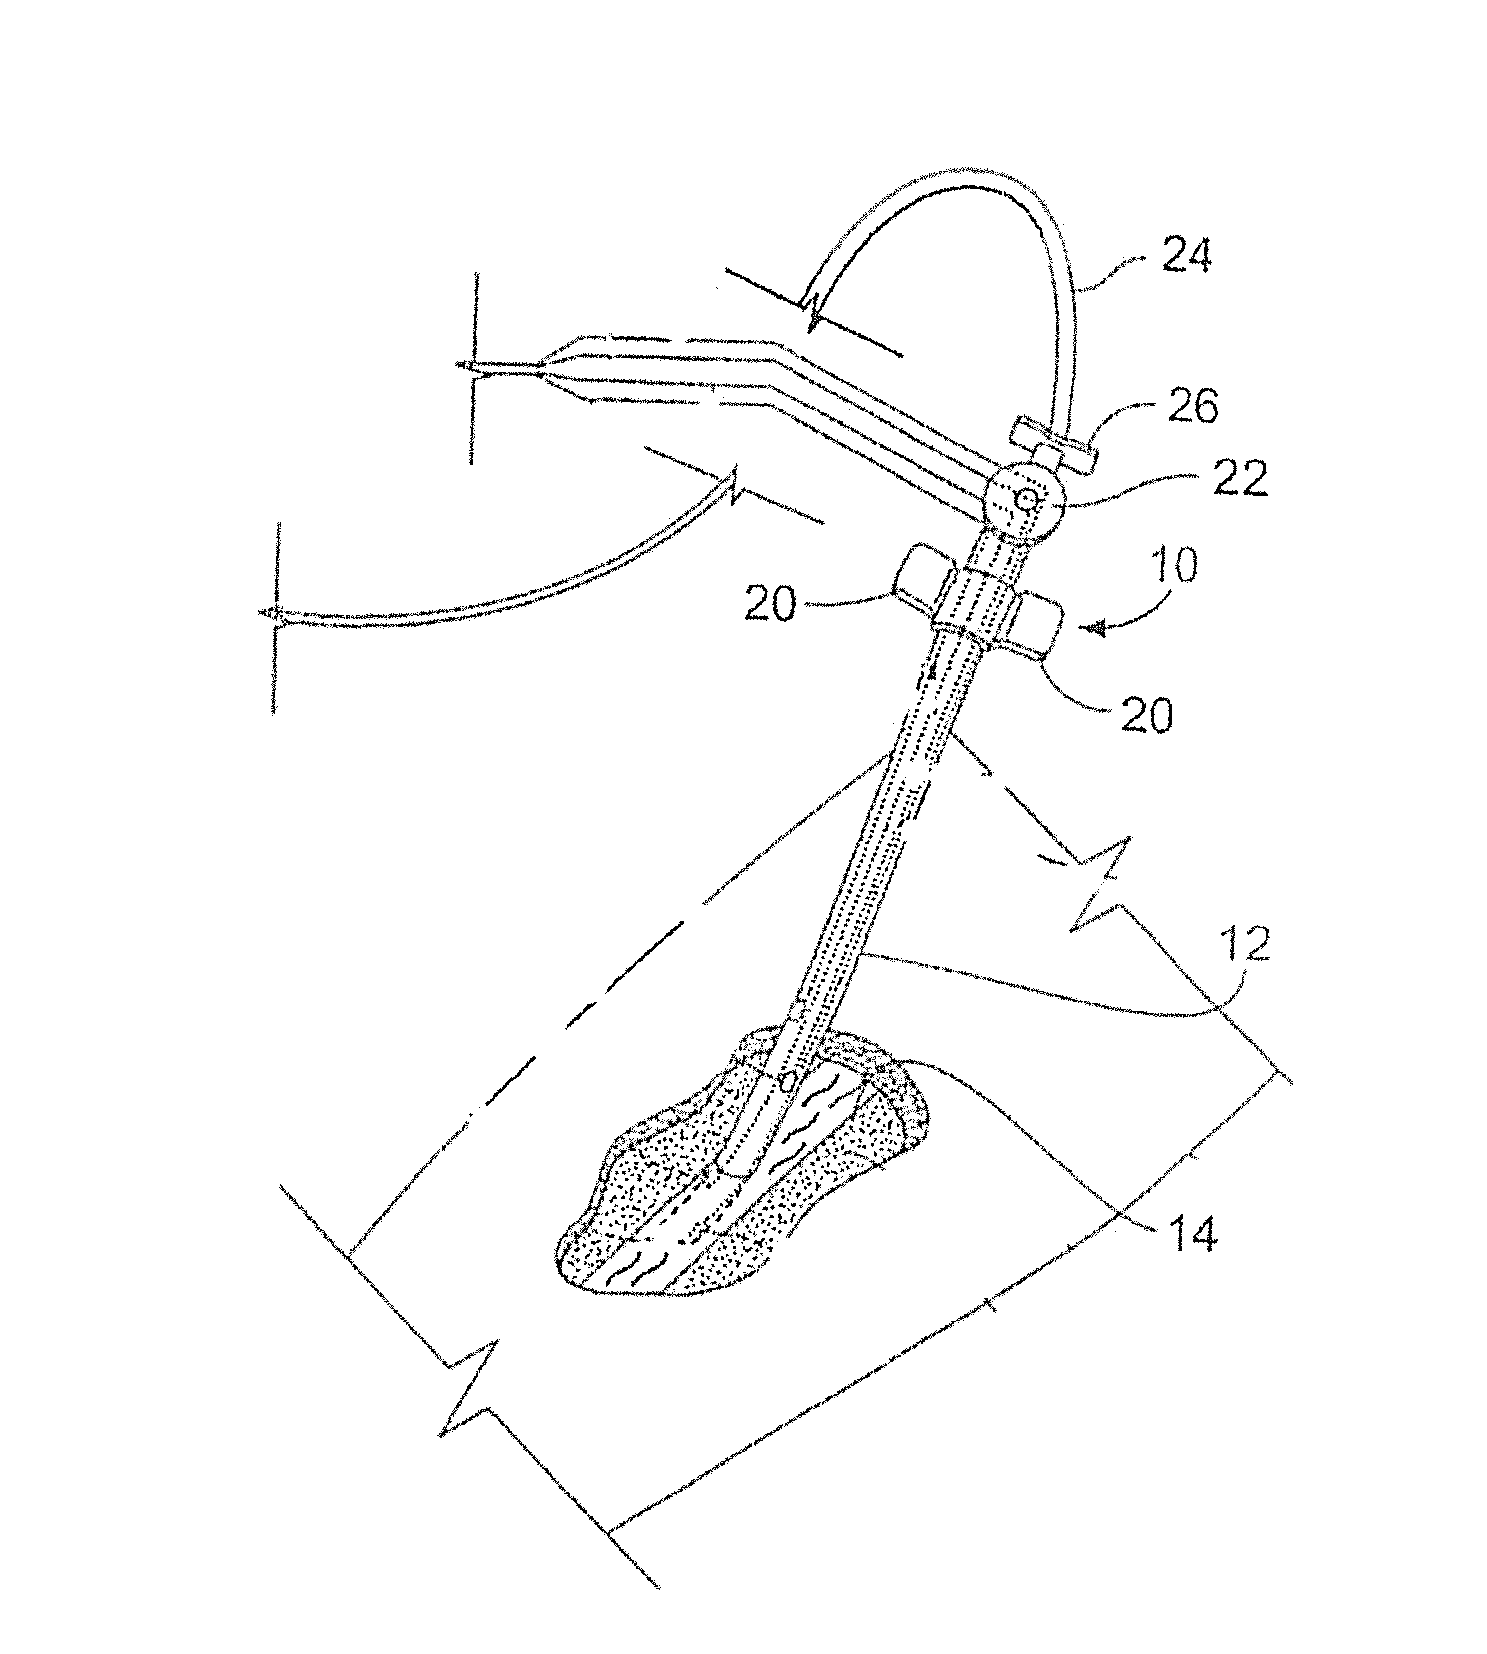 Coated medical apparatus and methods